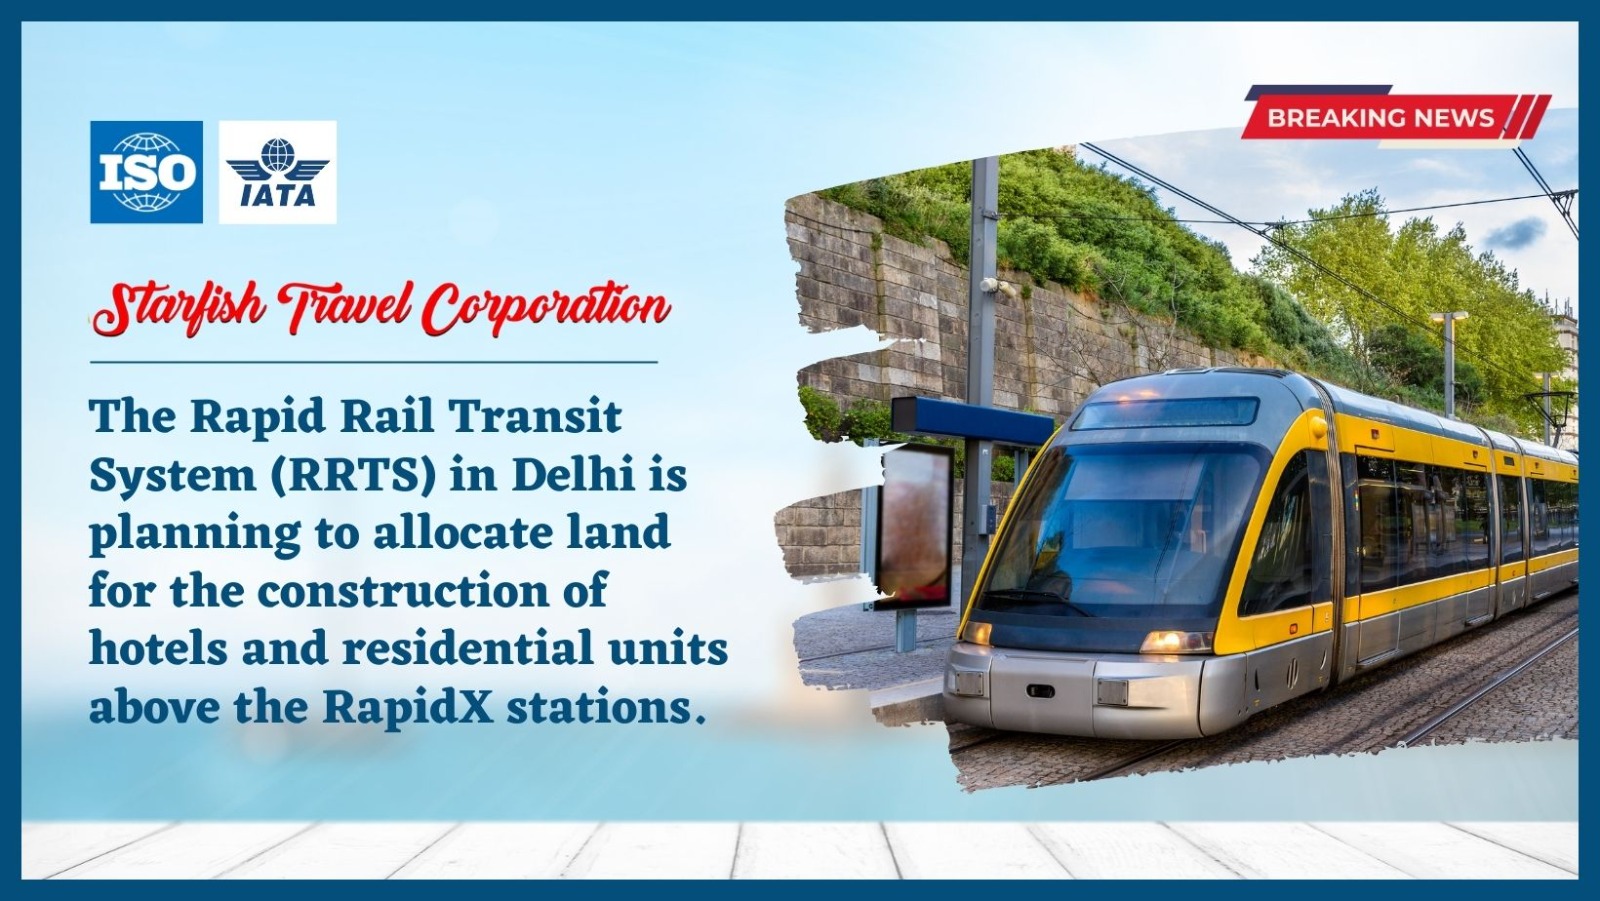 The Rapid Rail Transit System (RRTS) in Delhi is planning to allocate land for the construction of hotels and residential units above the RapidX stations.